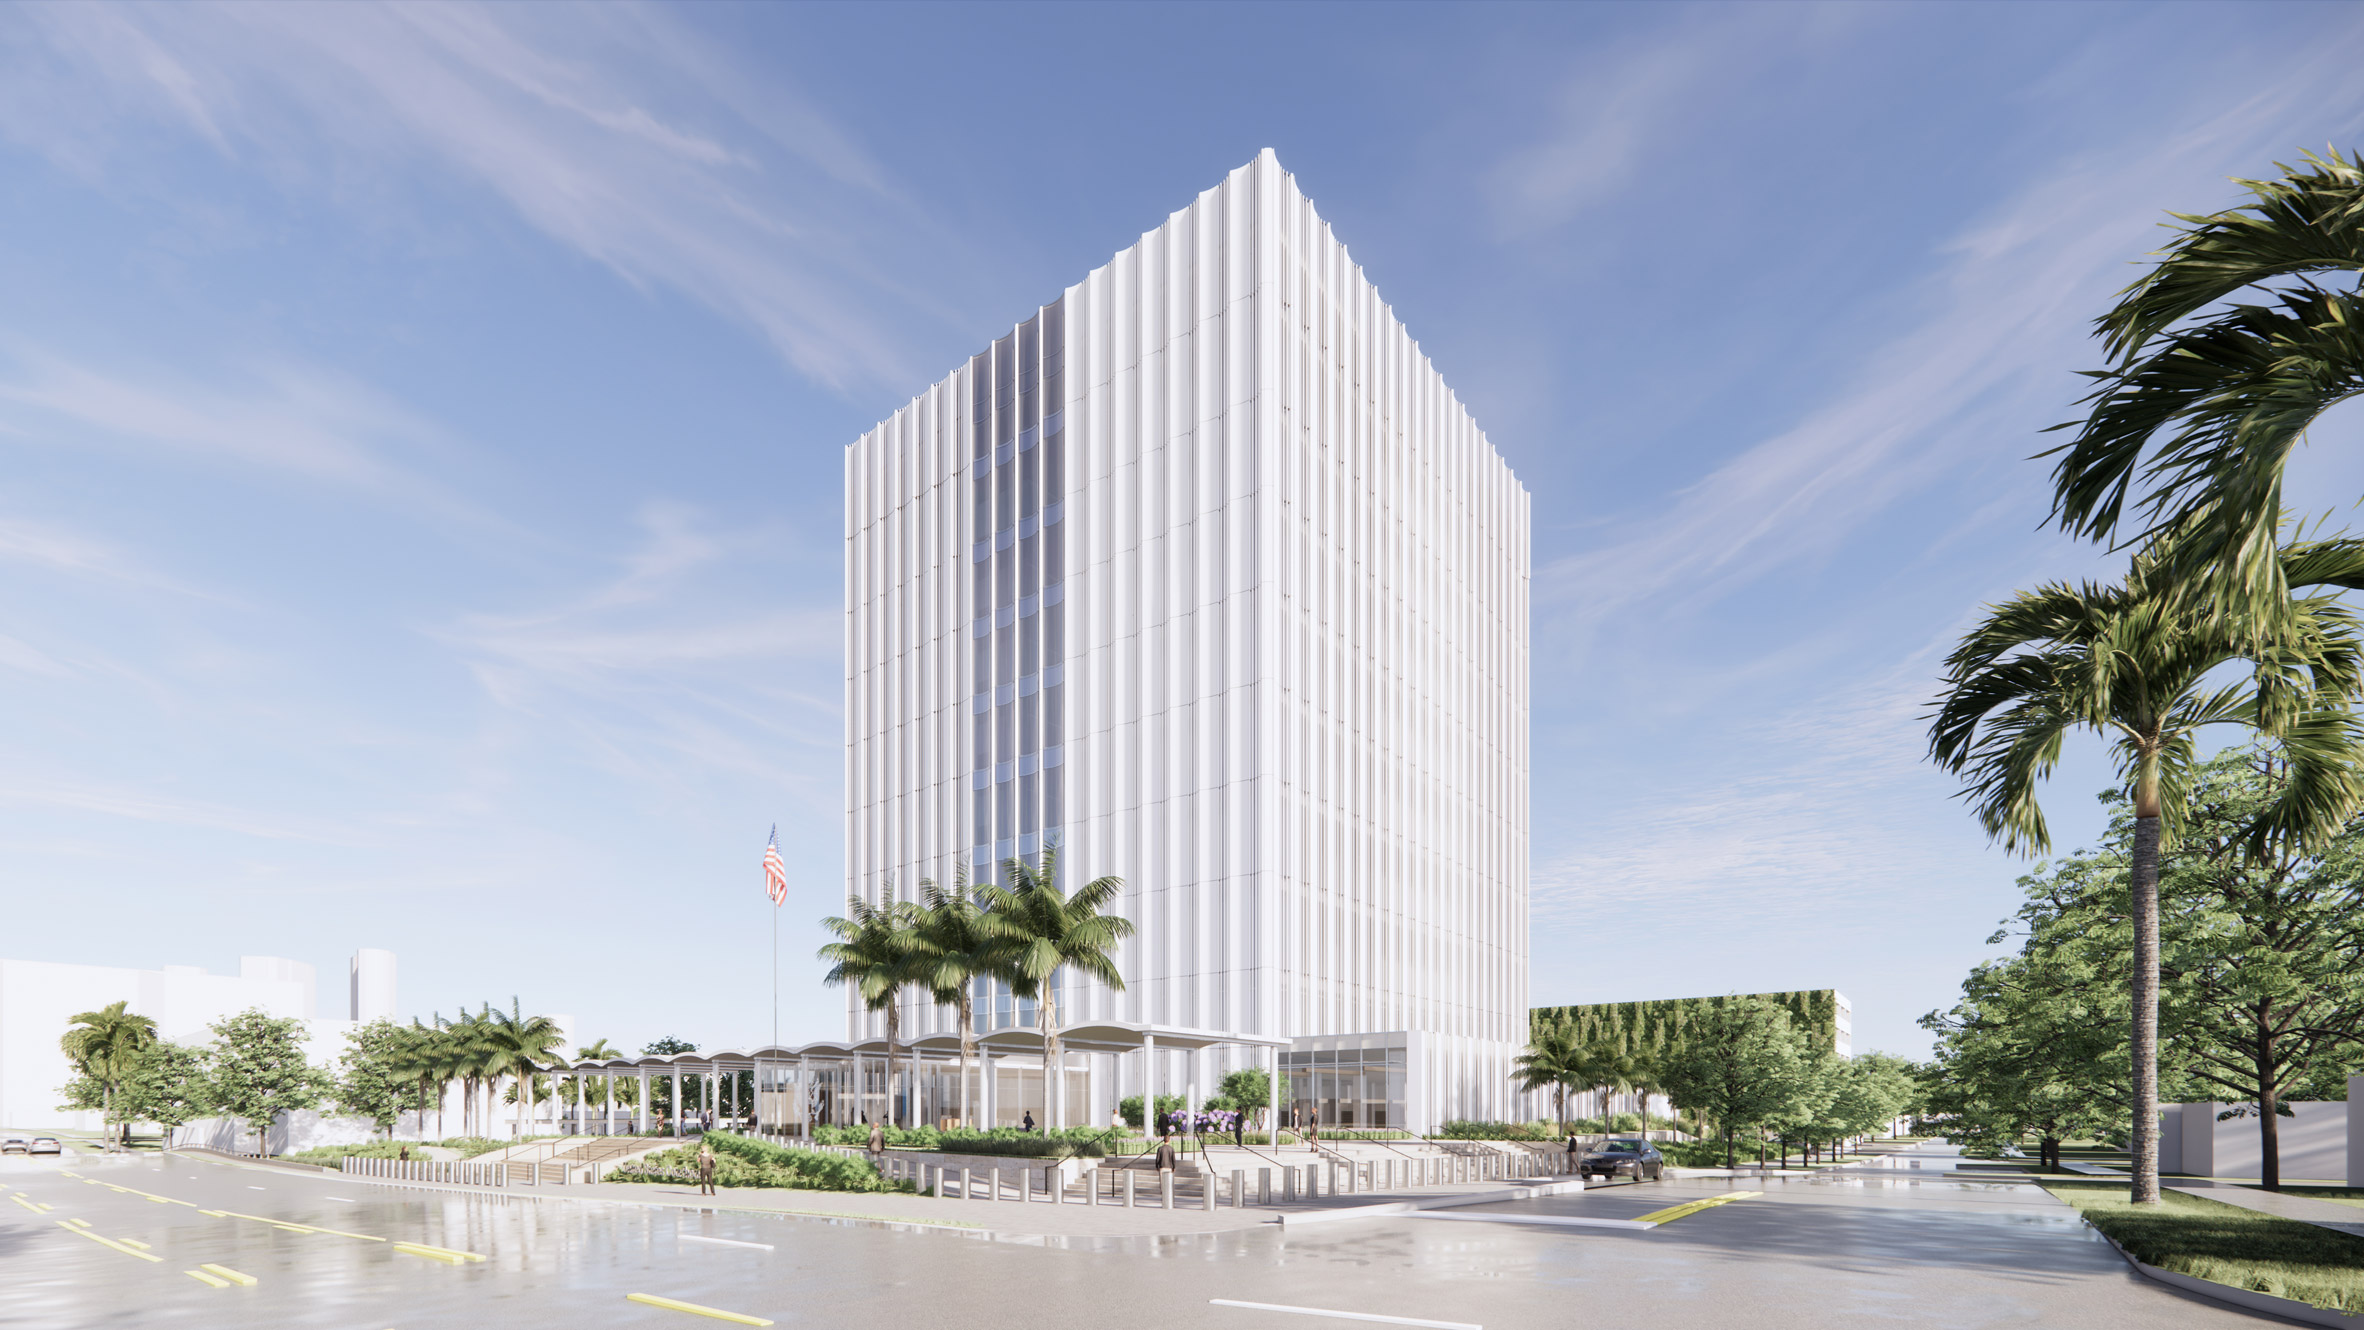 SOM Created A Classically Inspired Federal Courthouse In Fort Lauderdale.